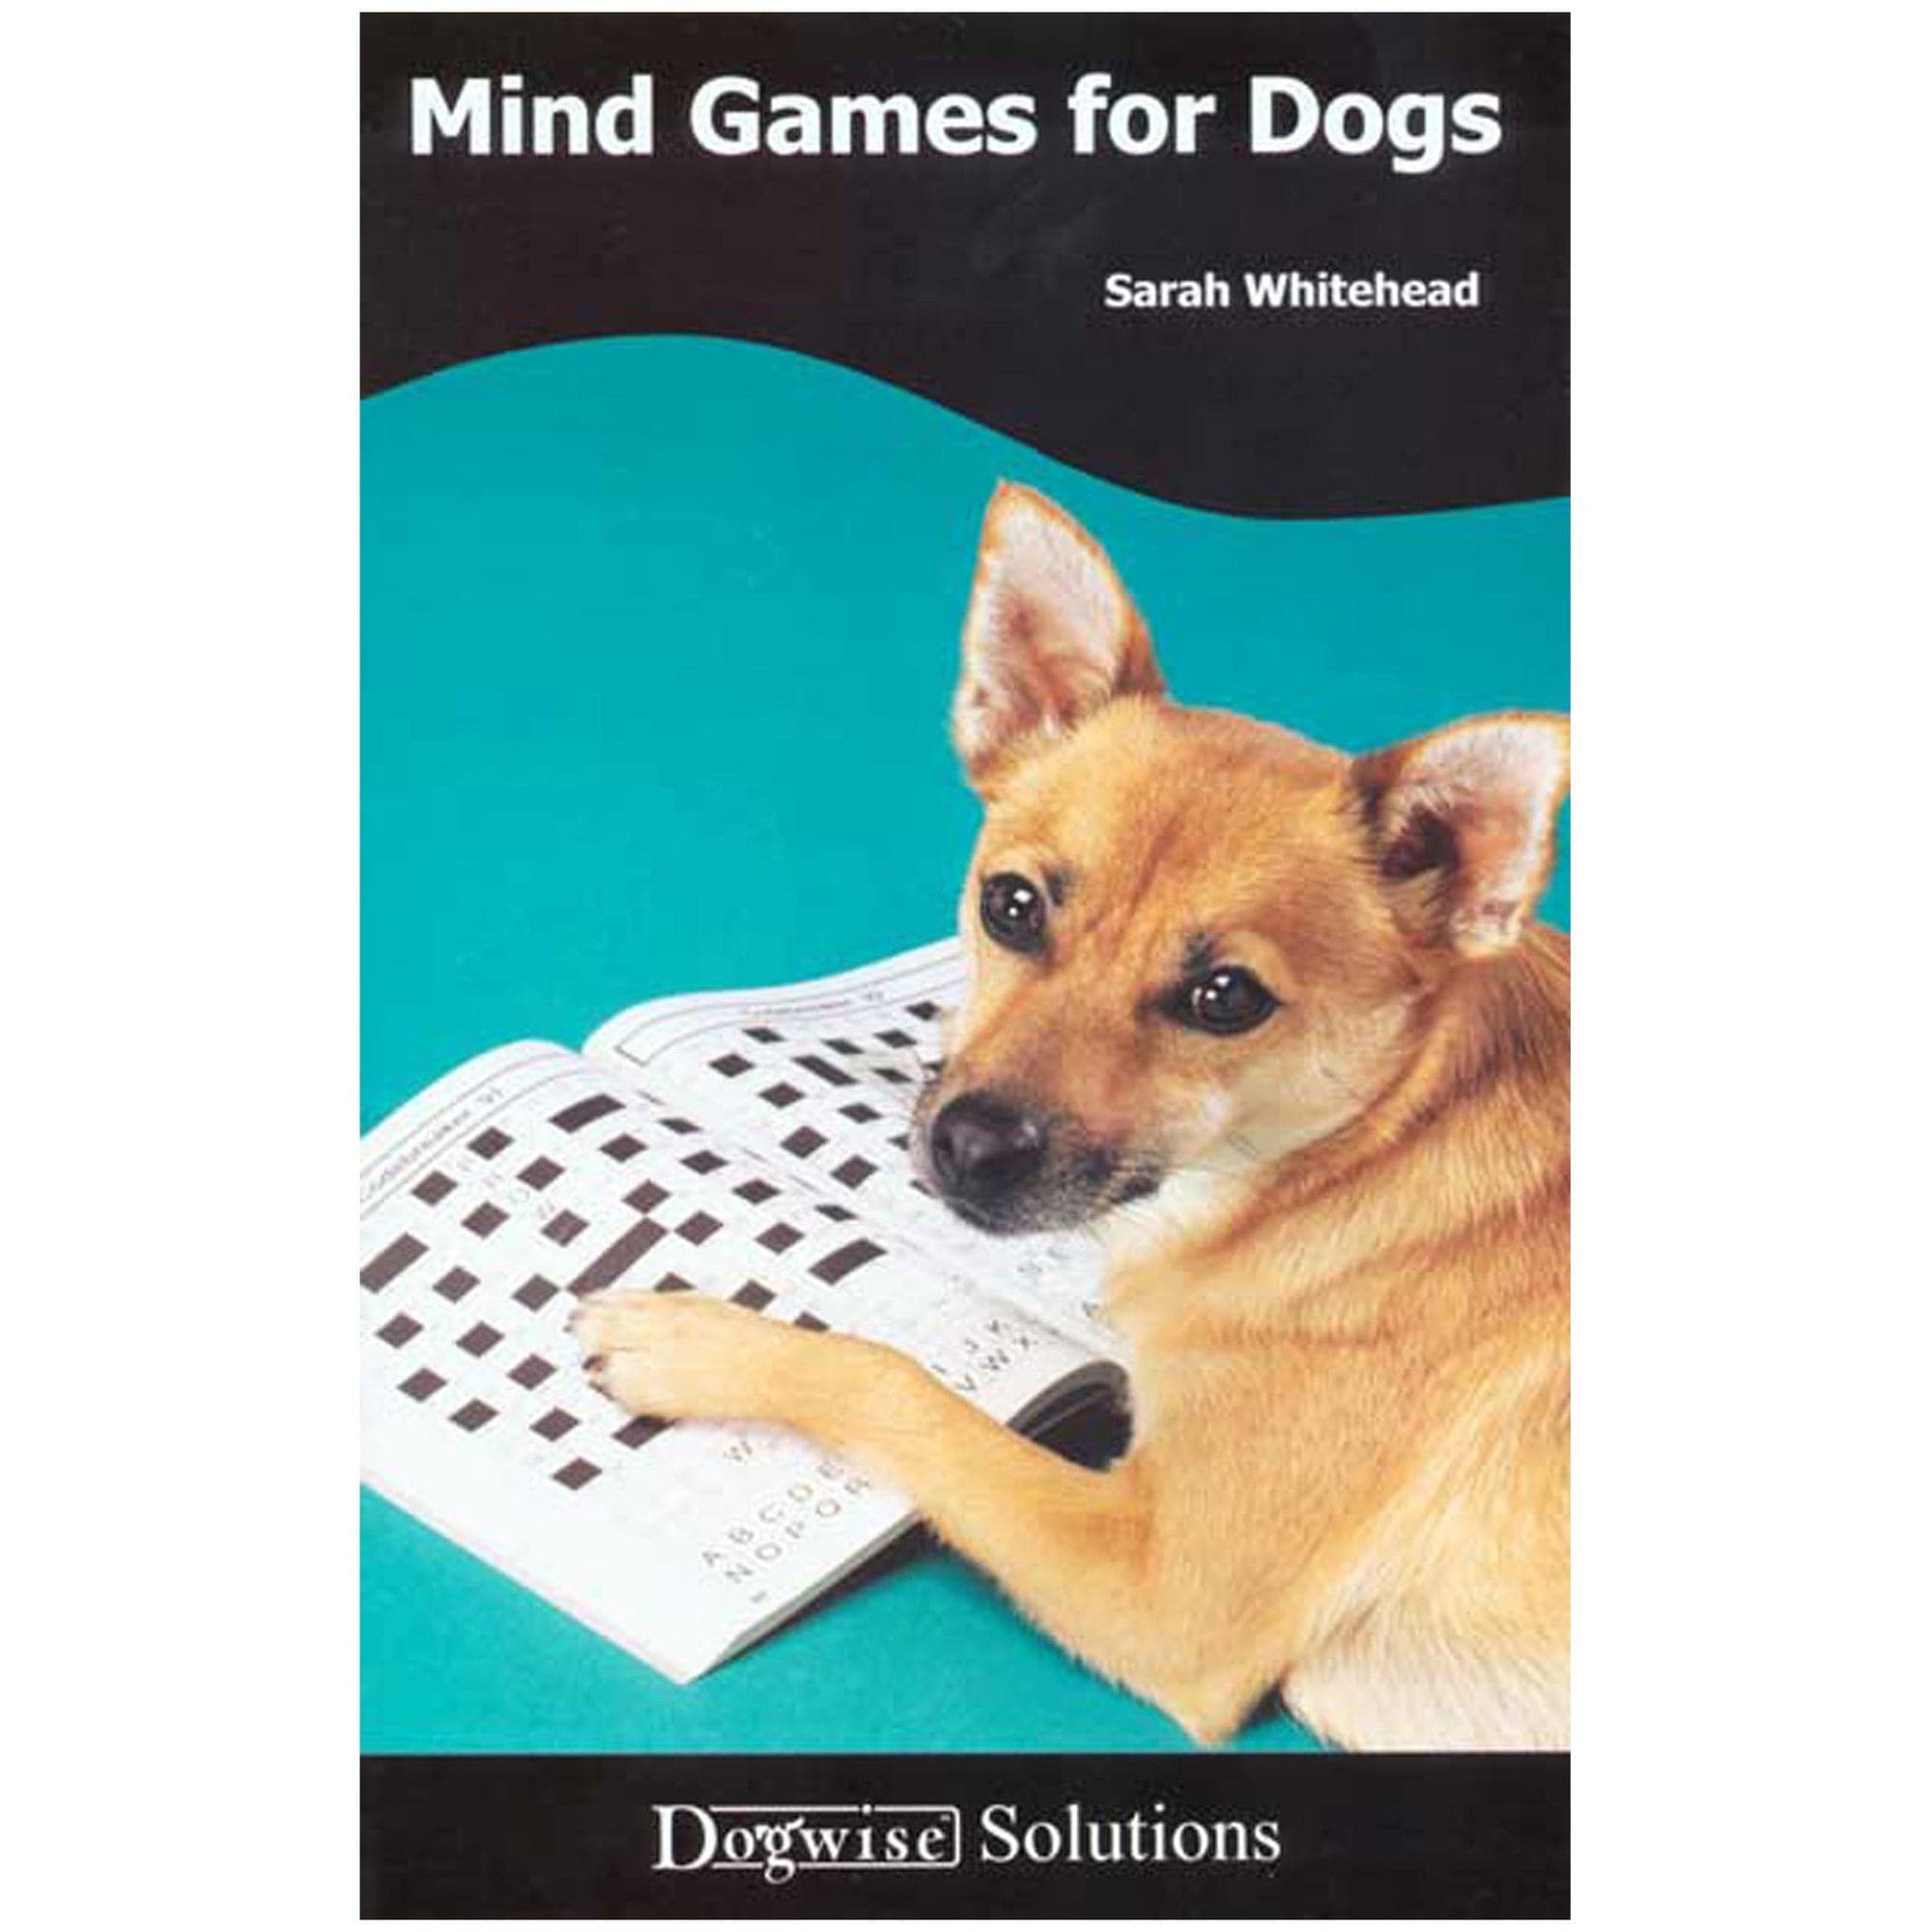 10 Fun Brain Games for Dogs - Canine Care